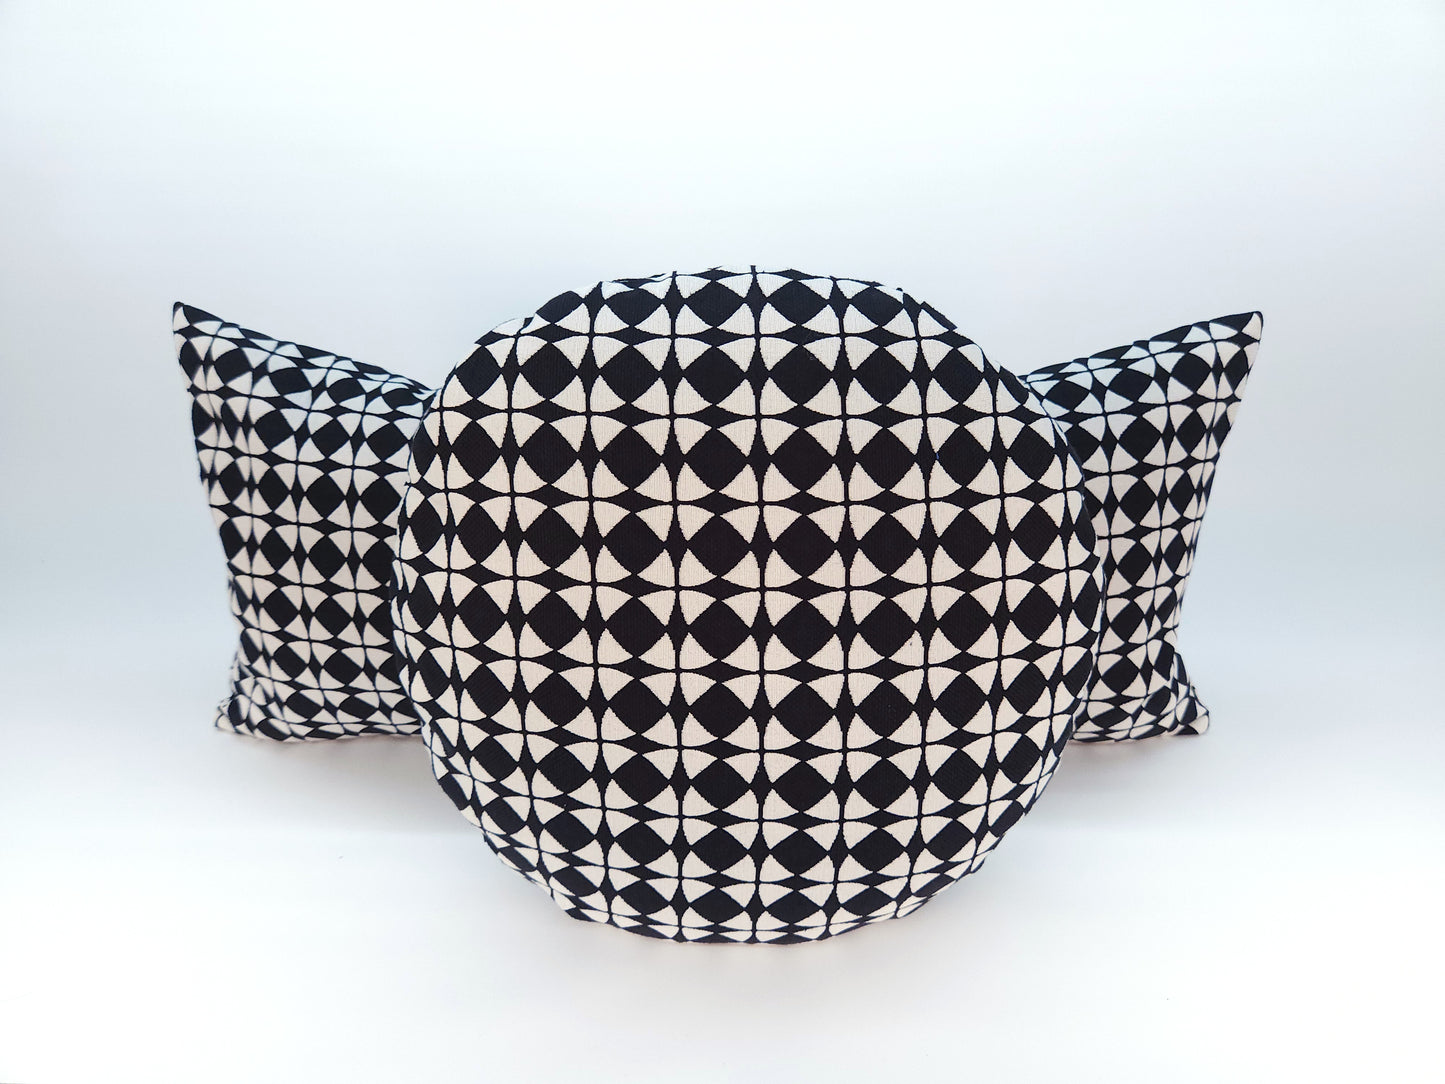 Explorer58 Rectangular Lumbar Pillow Cover, Deep Space Black, Various Sizes, with or without Inserts, Handmade by Houston and Scott